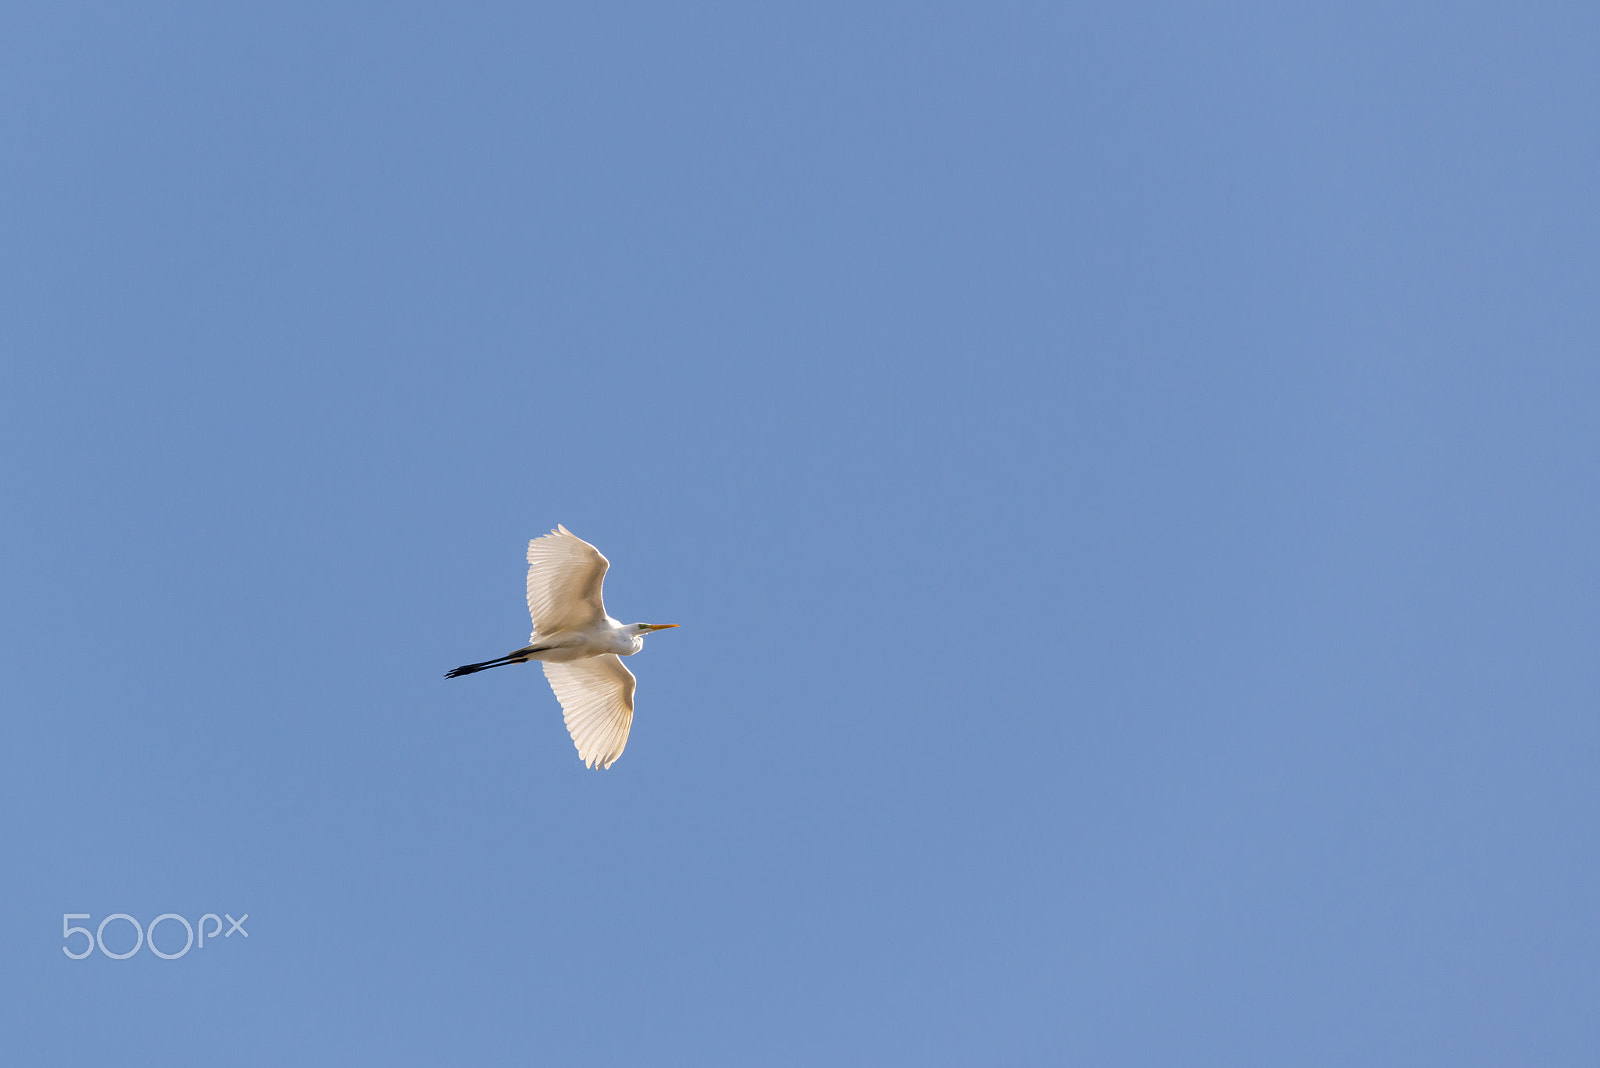 Nikon D800 + Sigma 150-600mm F5-6.3 DG OS HSM | S sample photo. Great egret in the sky photography